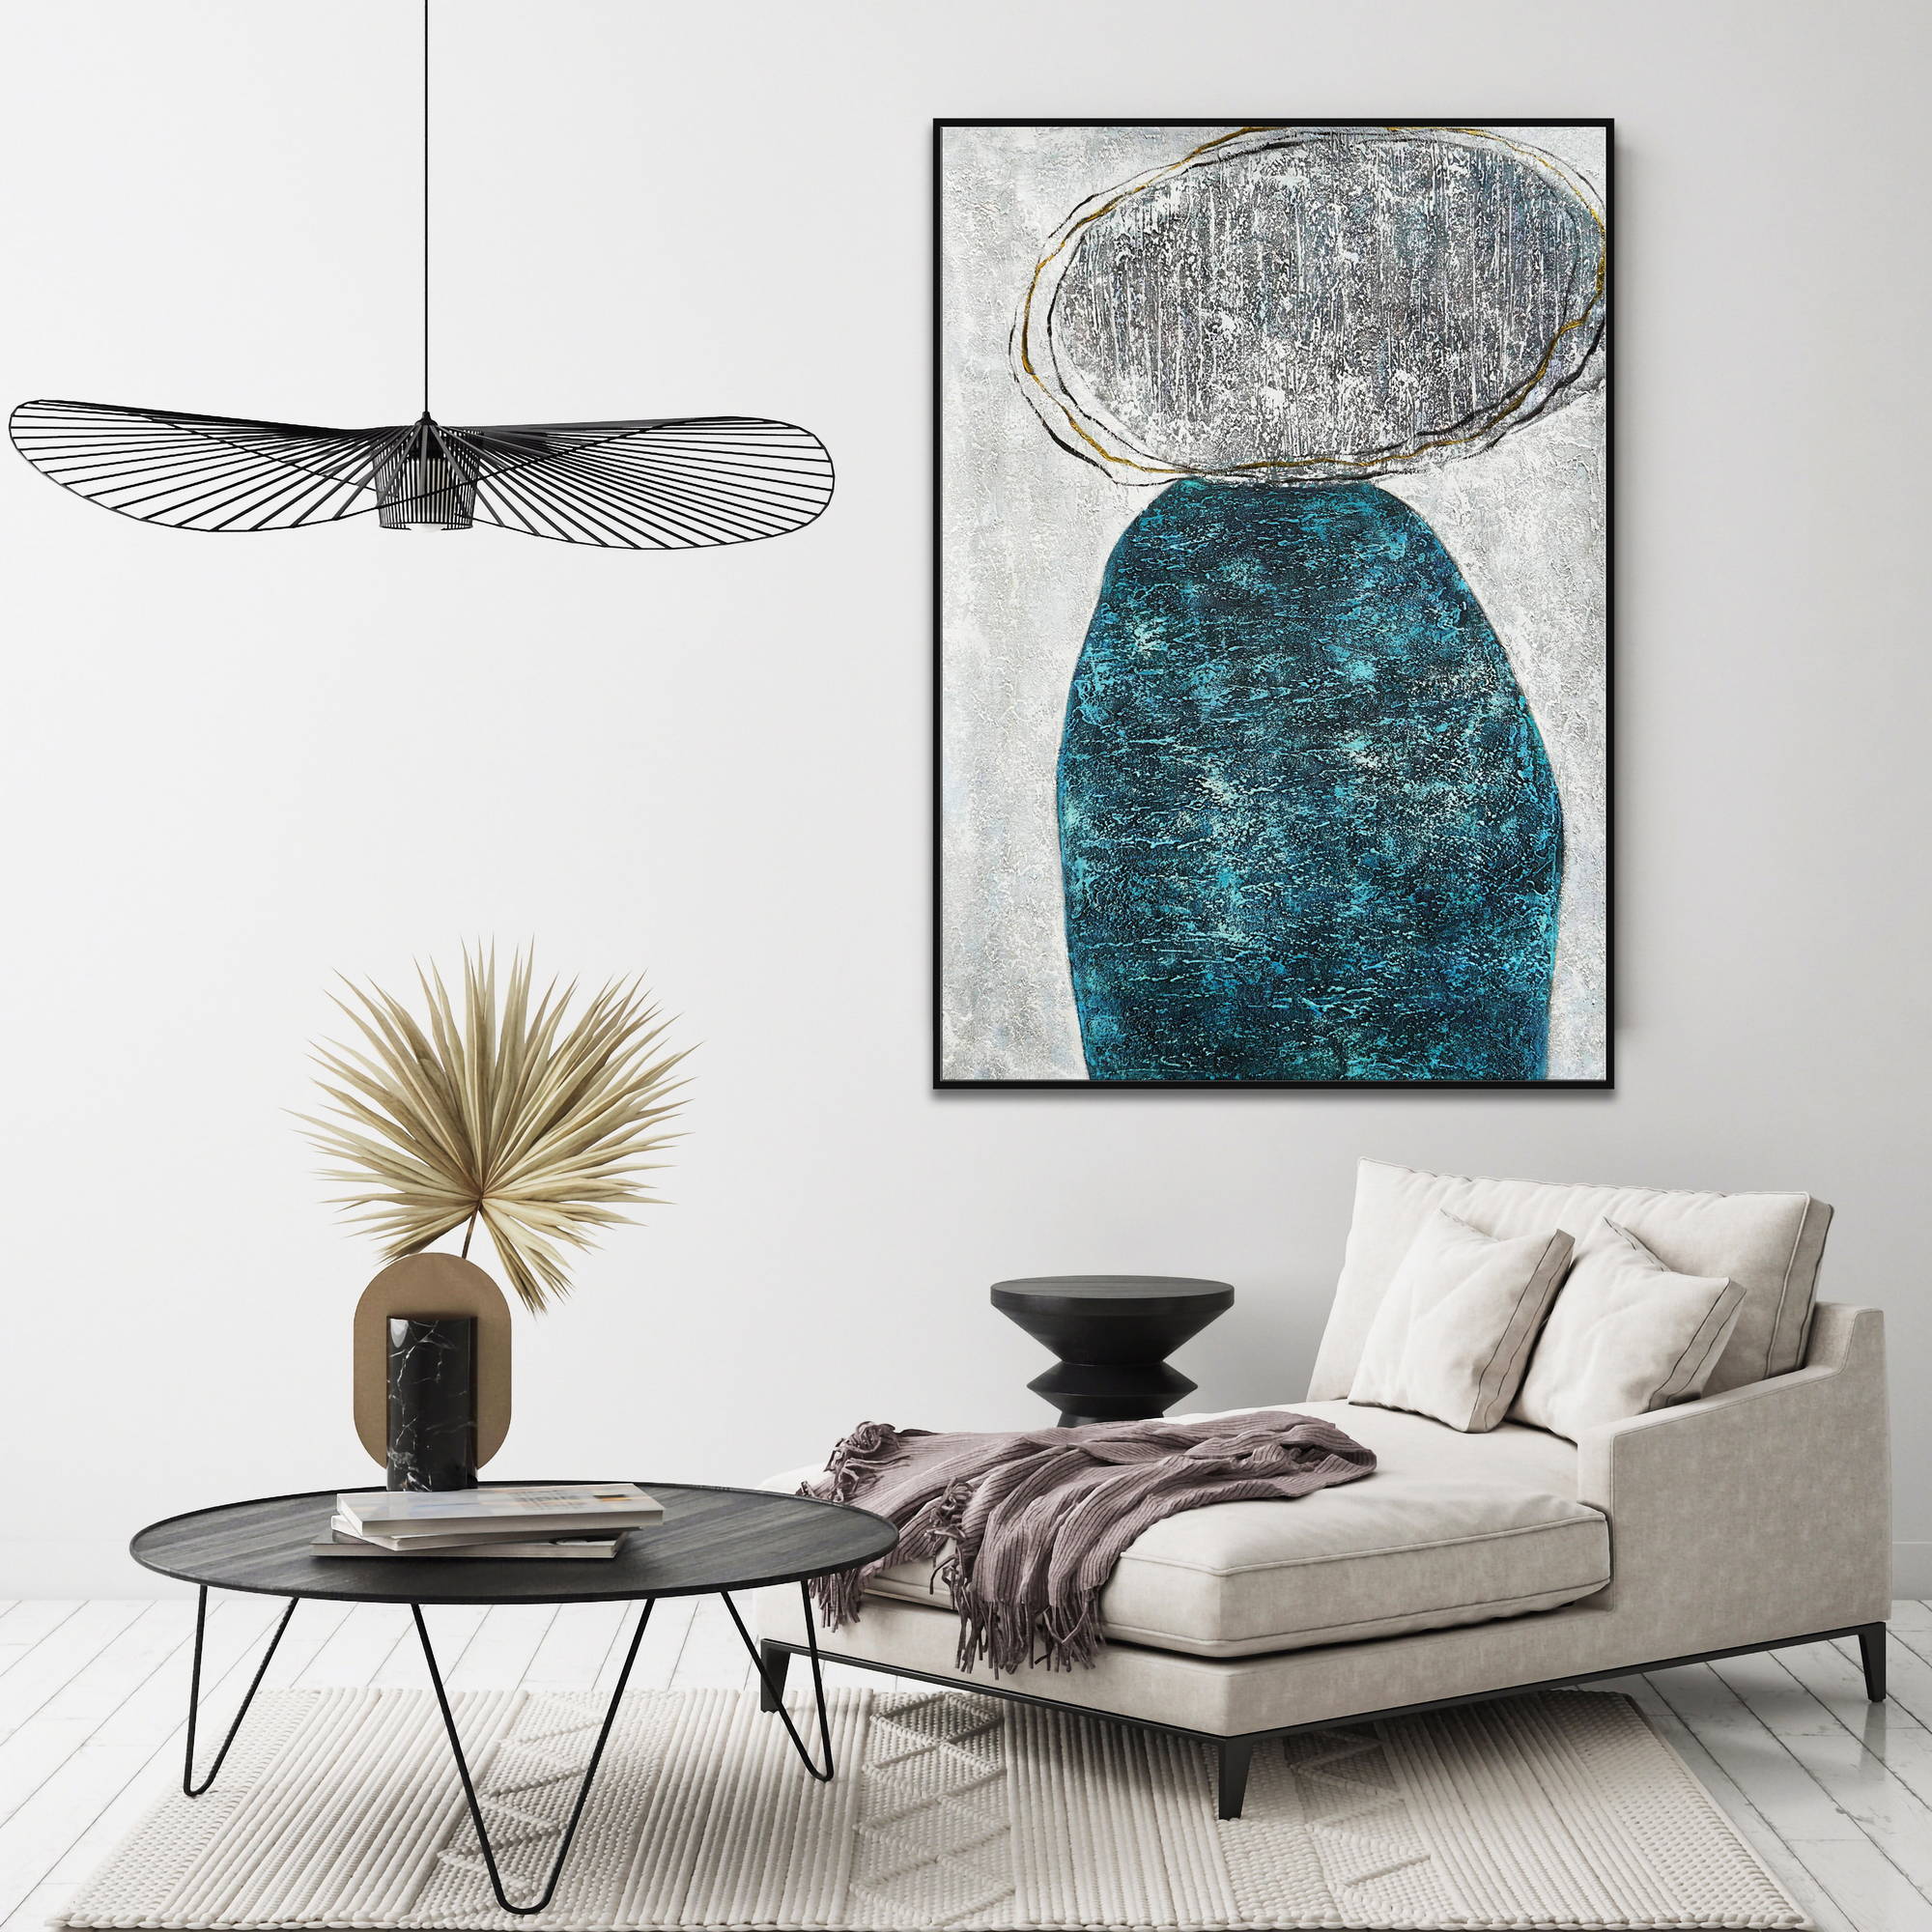 Hand painted Abstract geometric figures 80x120cm